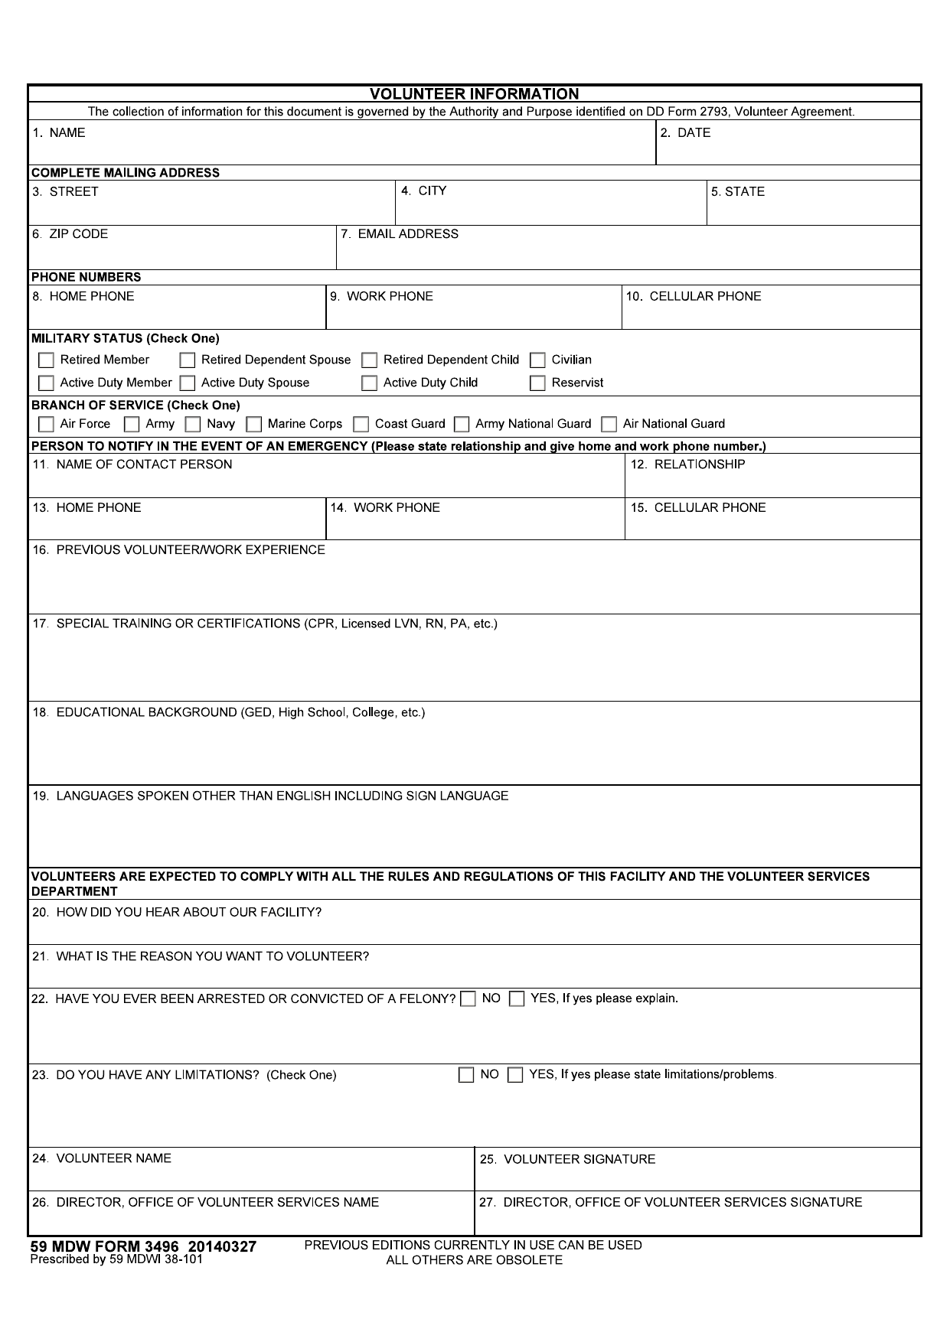 59 MDW Form 3496 Volunteer Information, Page 1